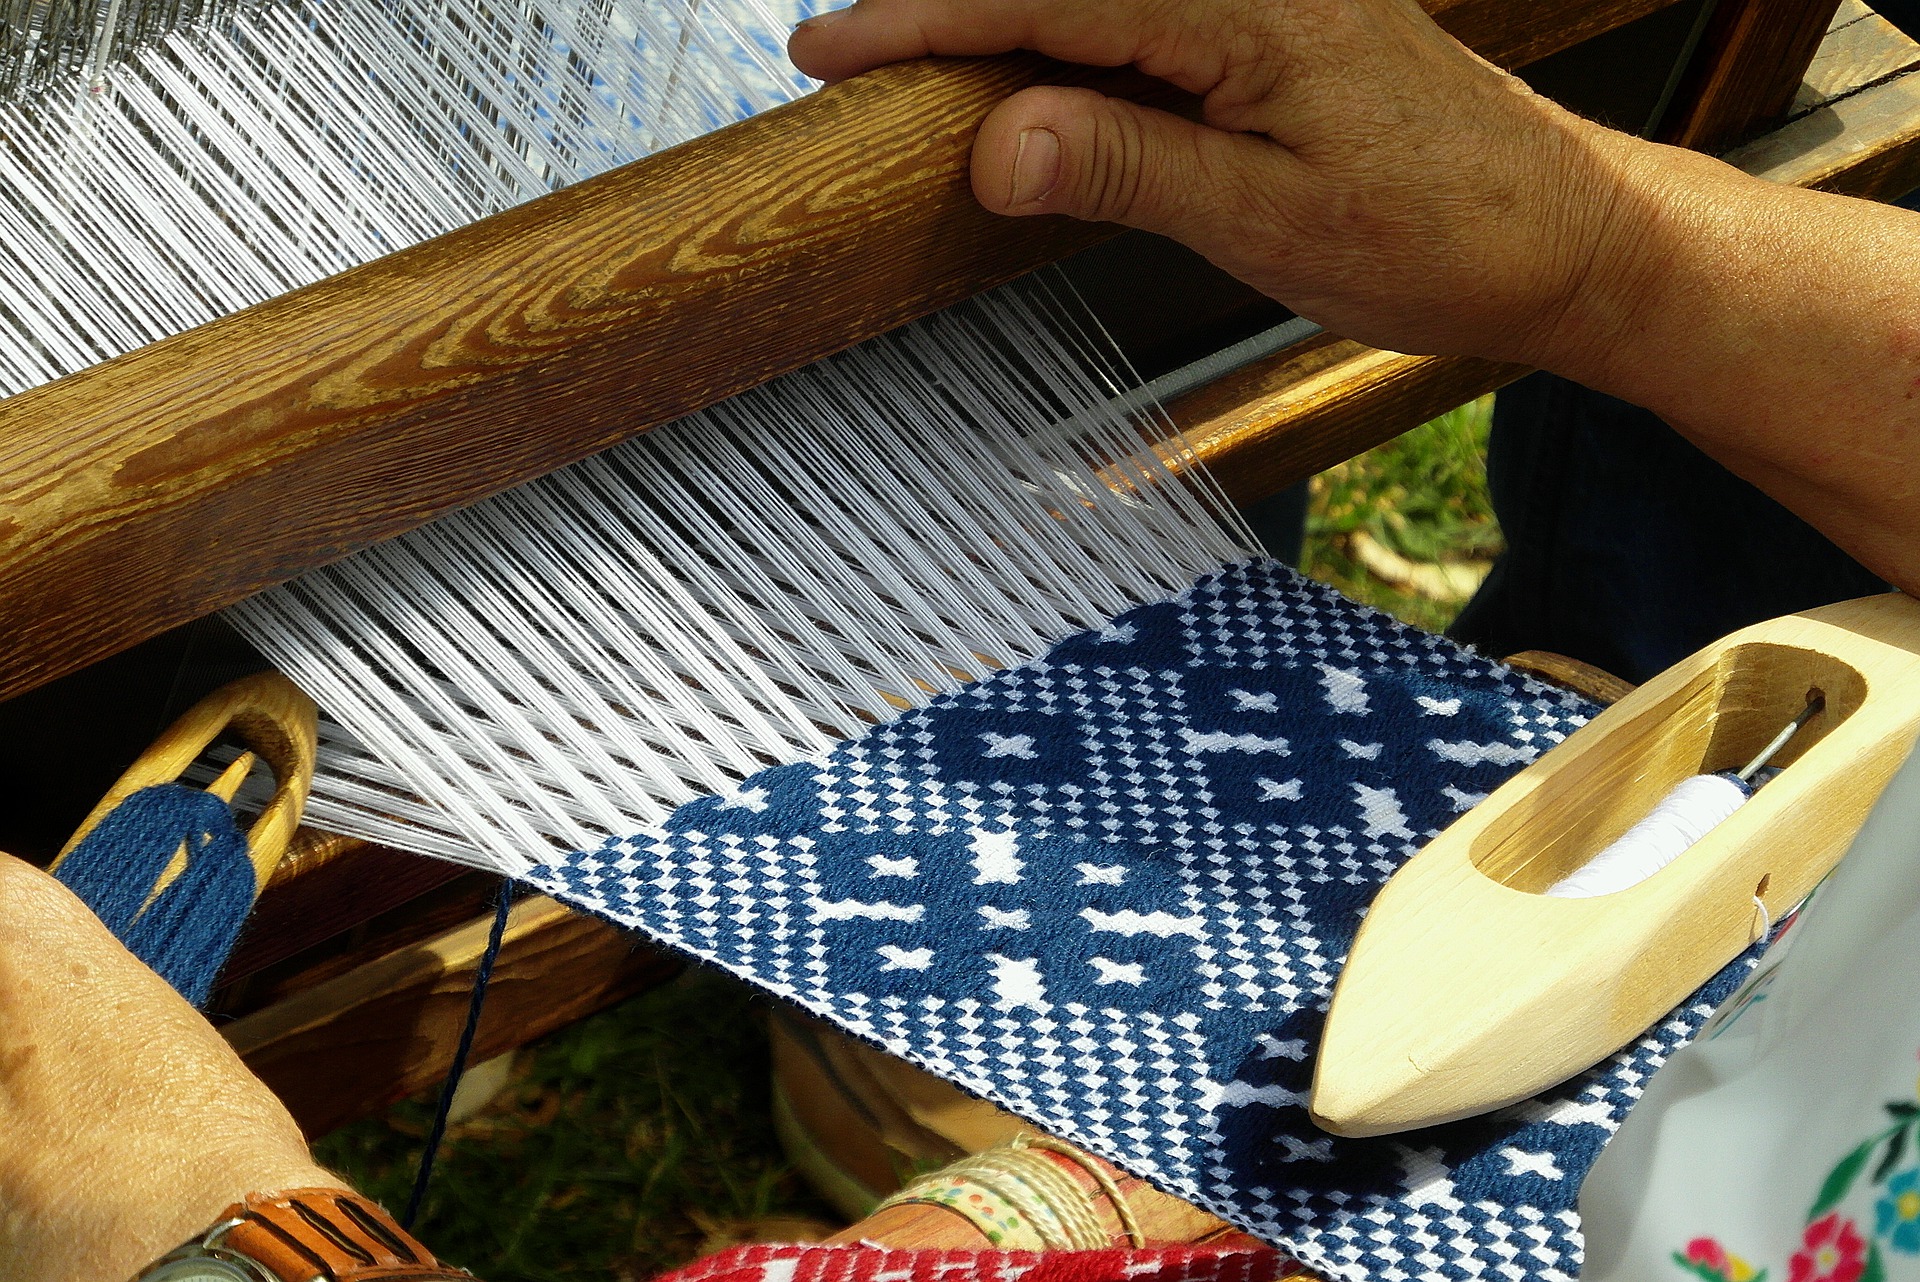 Weaving: How to Make Your Own Cloth